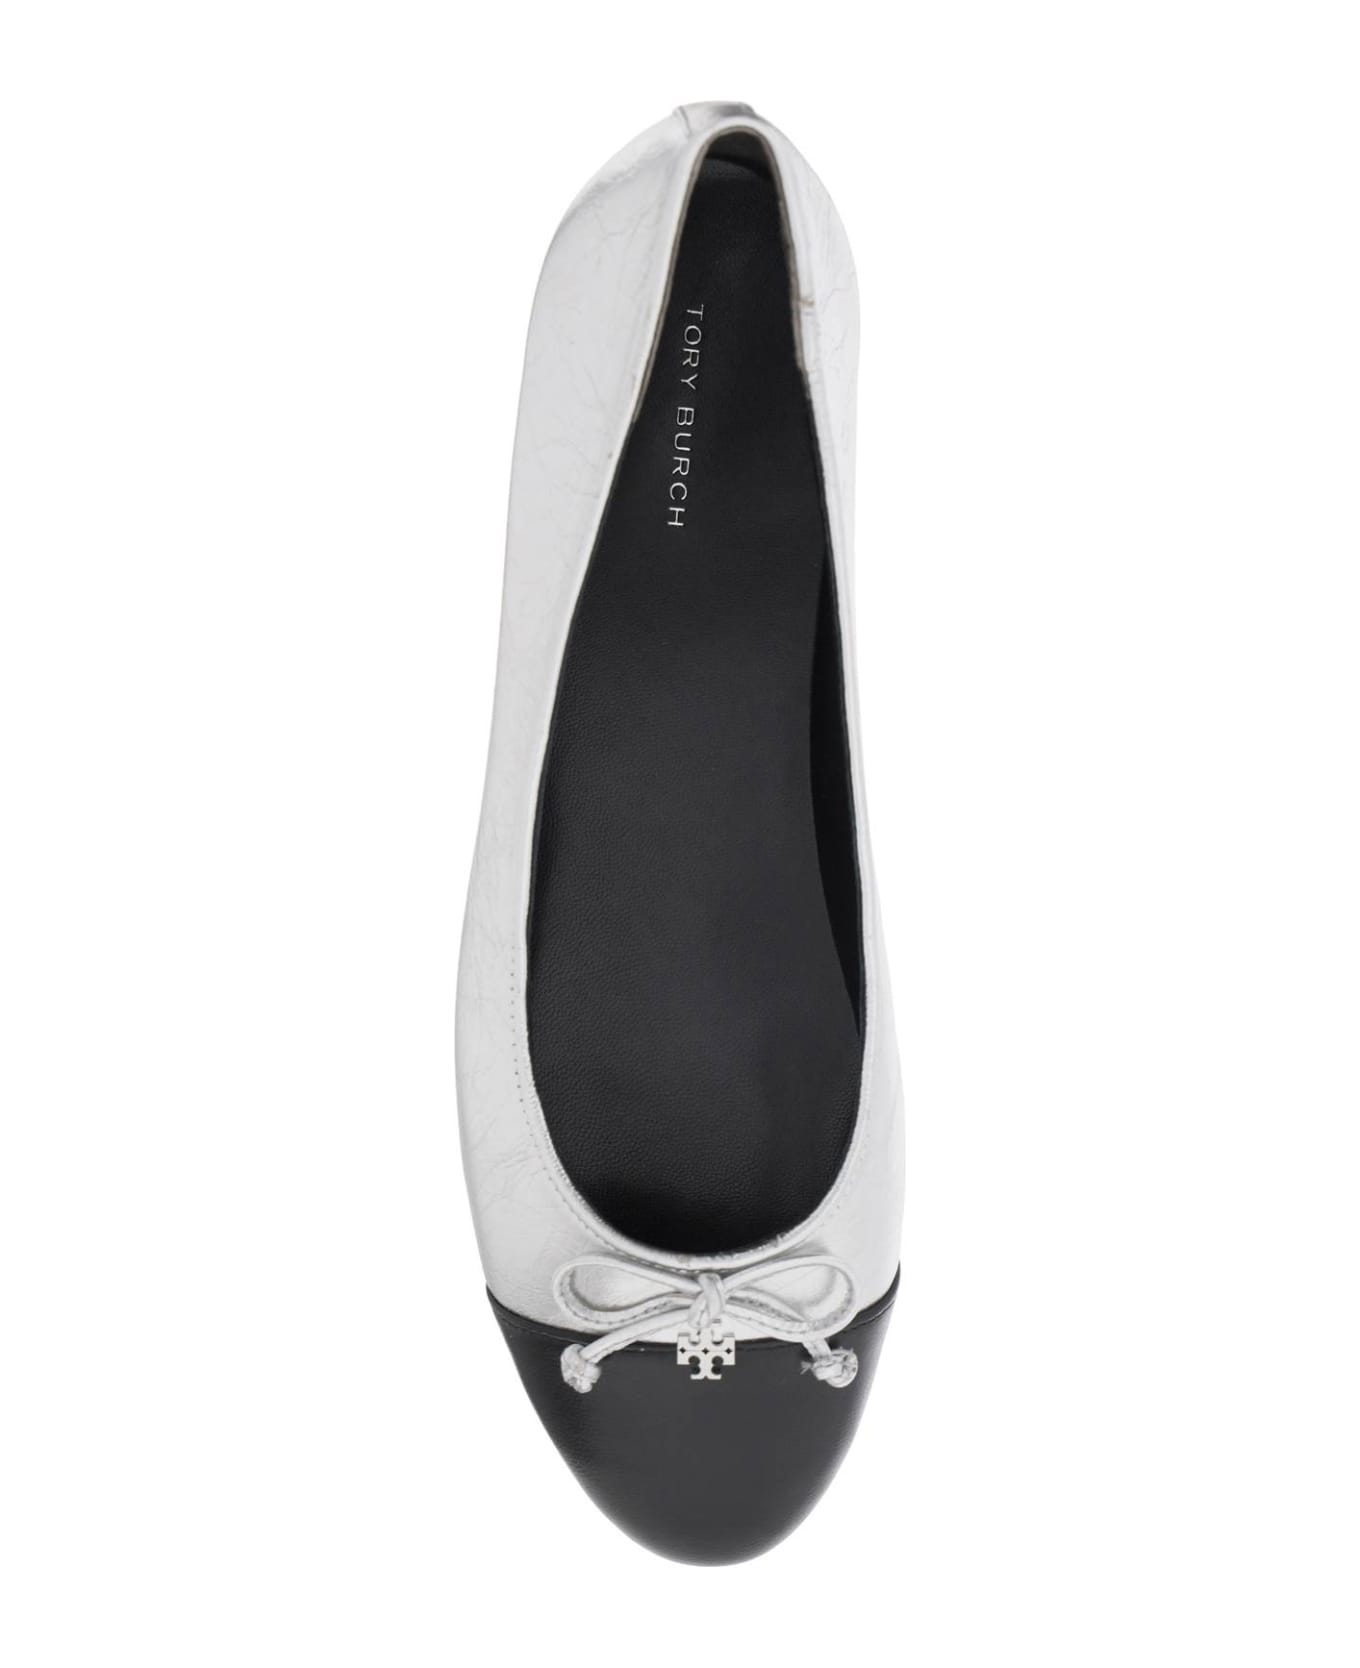 Tory Burch Laminated Ballet Flats With Contrasting Toe - Silver/Black